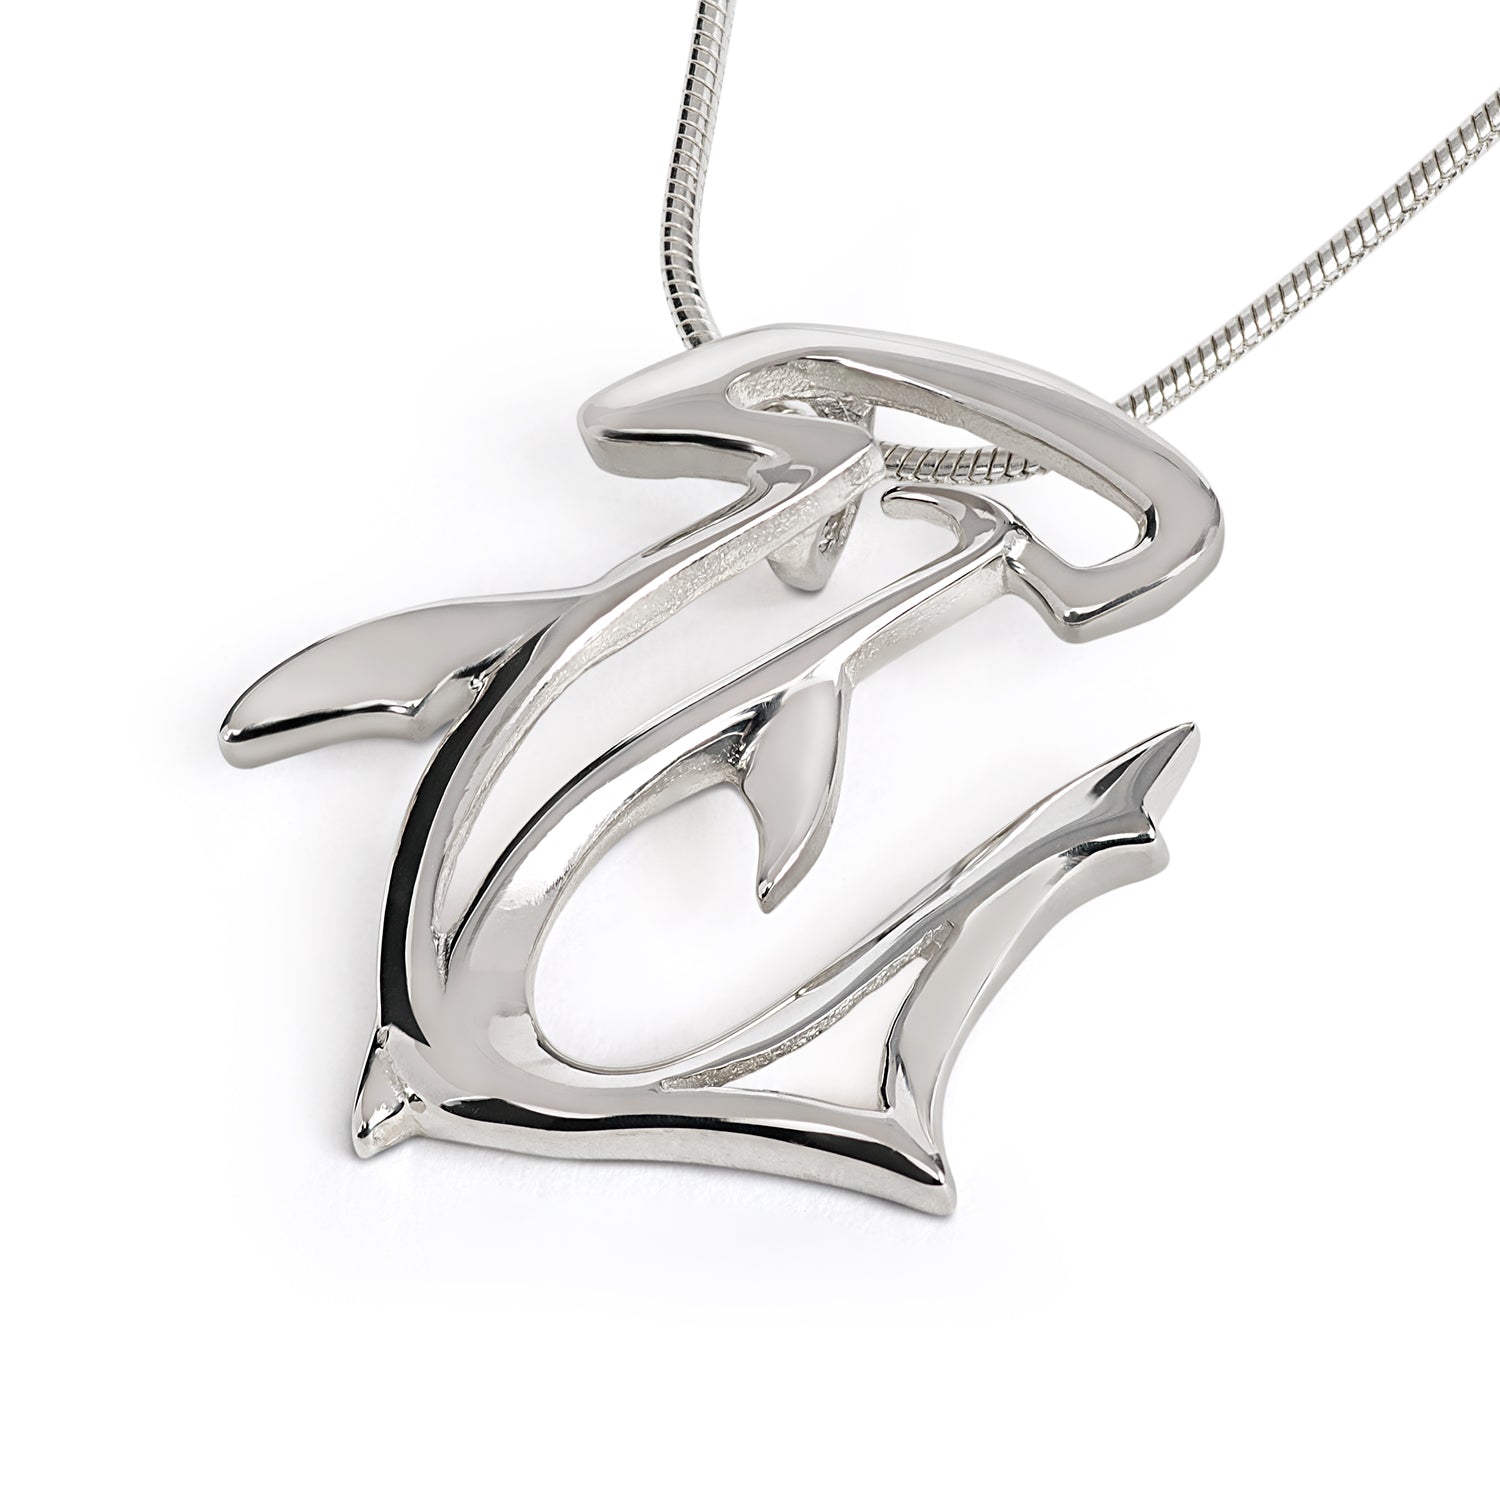 Hammerhead Shark Necklace -Sterling Silver Shark Pendant, Shark Jewelry for Women, Gifts for Shark Lovers - The Tool Store